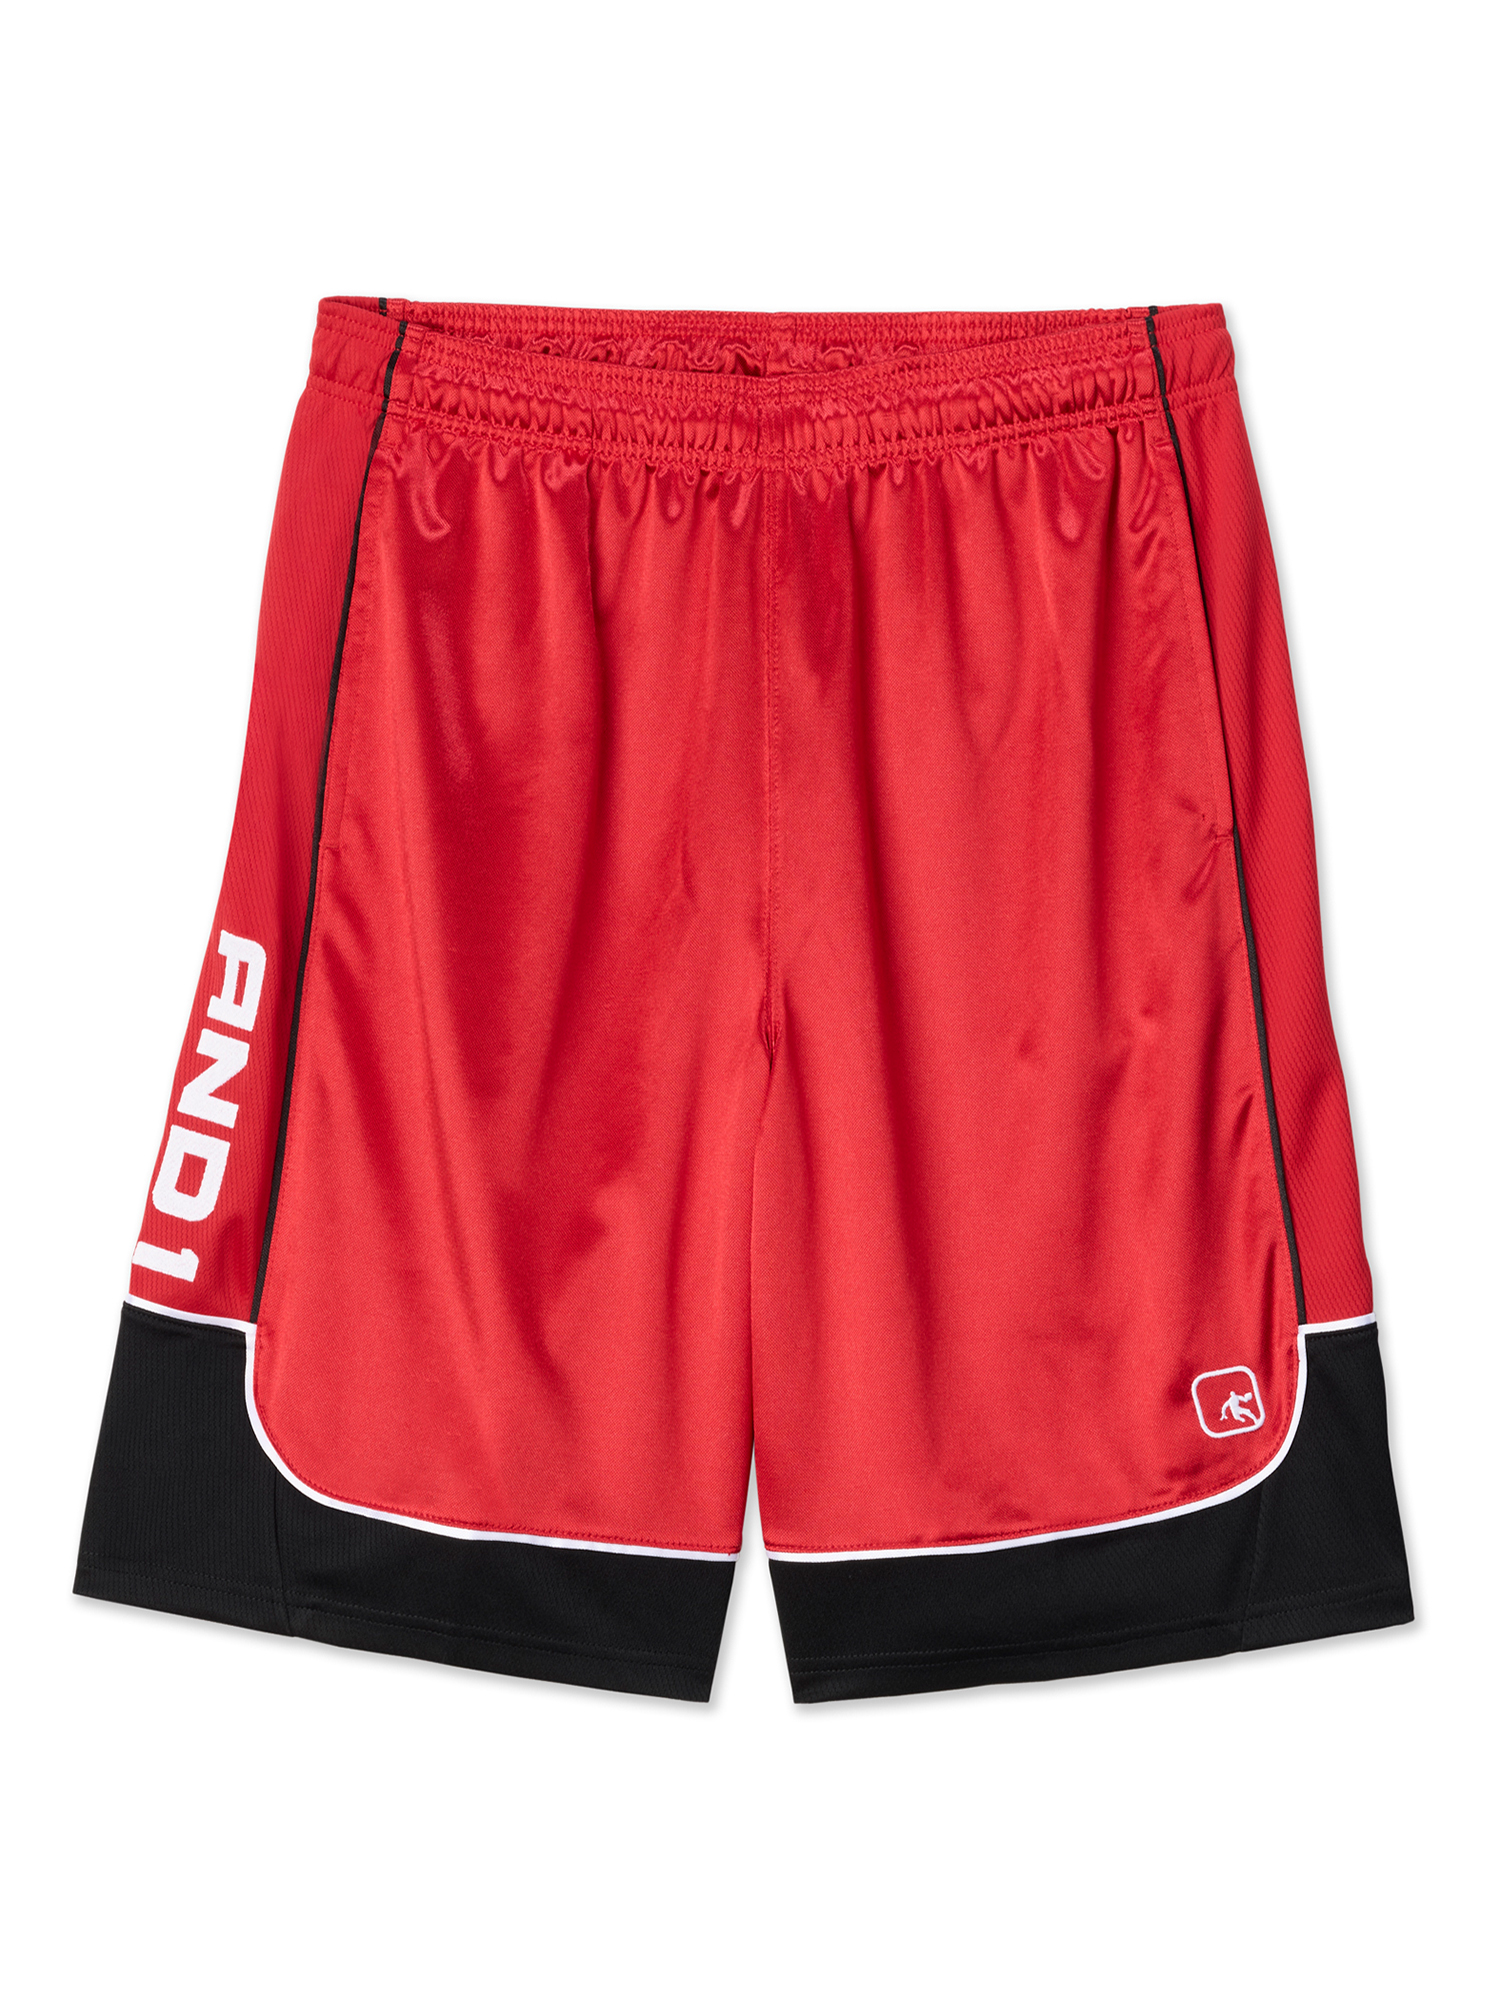 AND1 Men and Big Men's All Court Colorblock 11" Shorts, up to Size 3XL - image 5 of 5